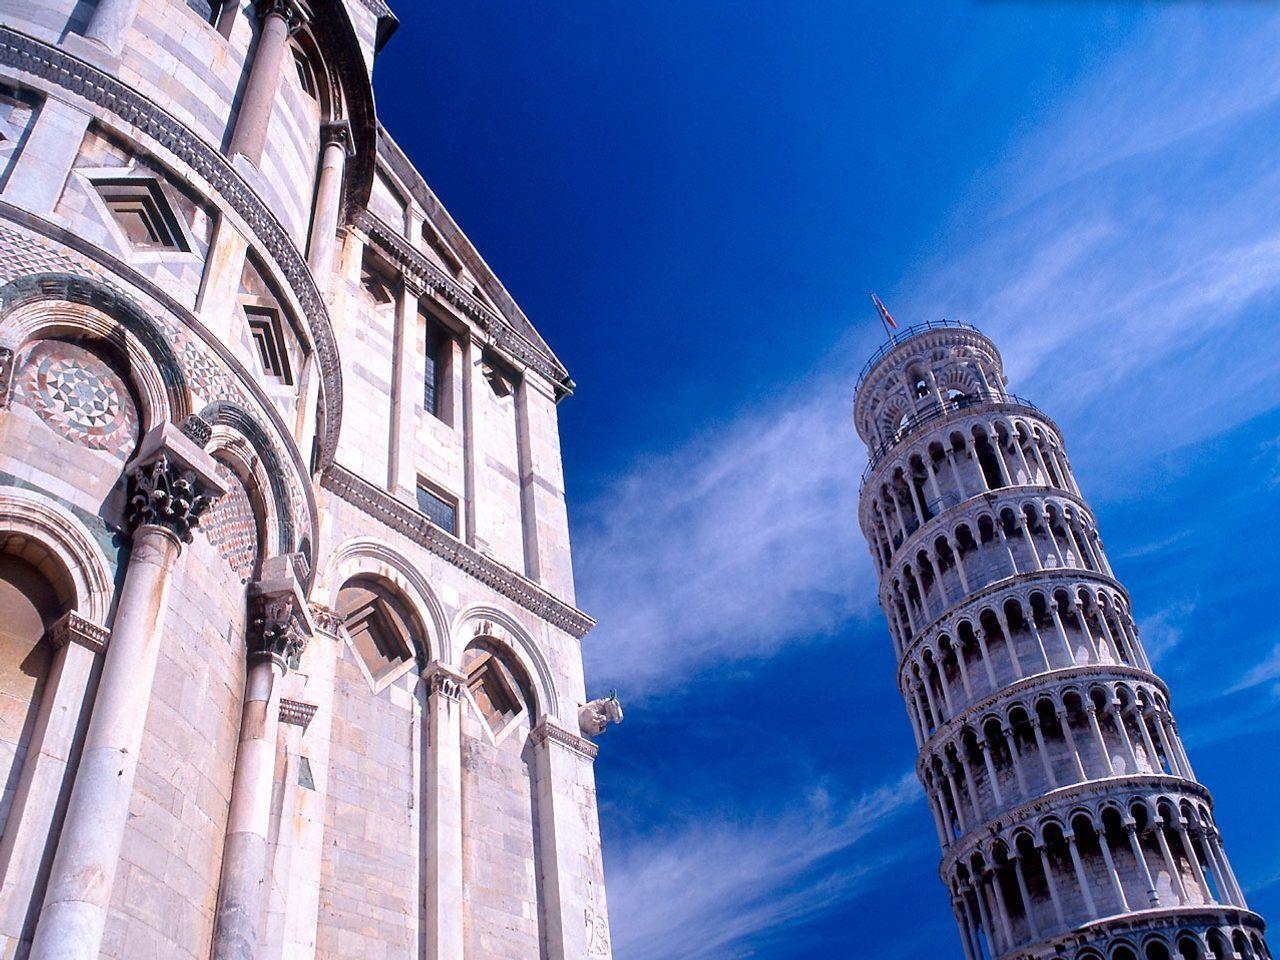 Leaning Tower of Pisa Italy Wallpaper. Travels Wallpaper Gallery